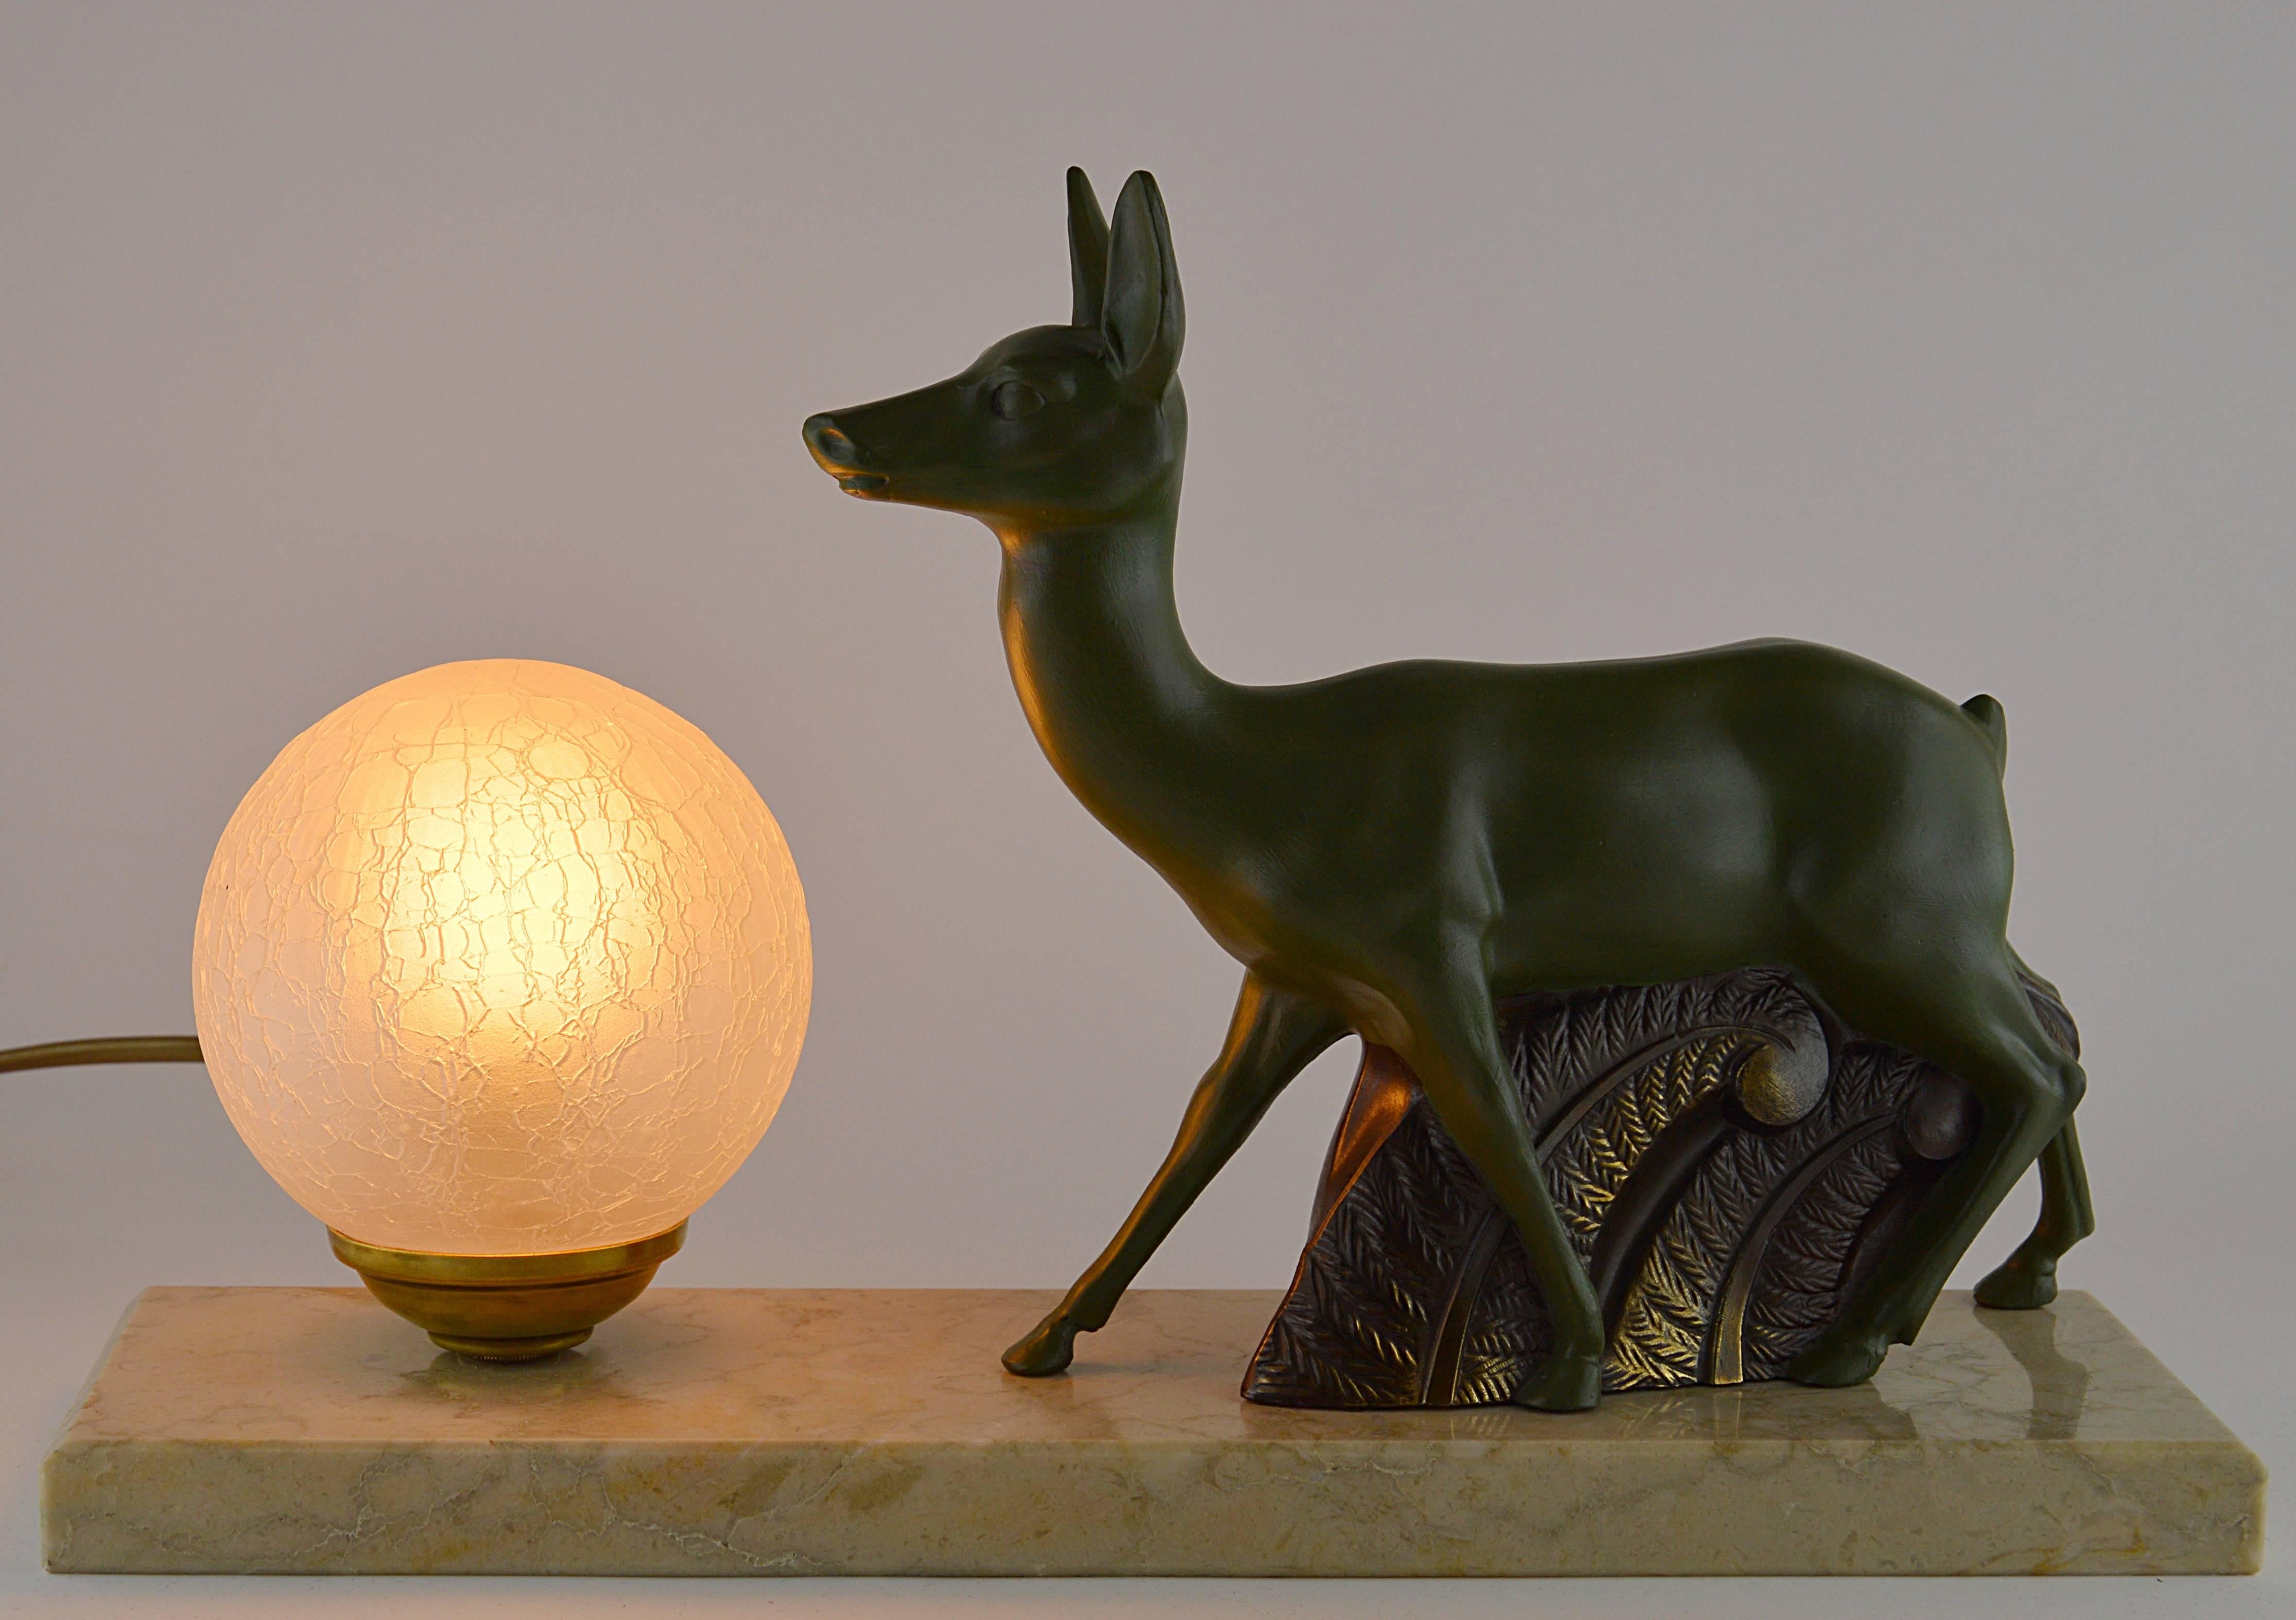 Take advantage of our nice summer prices. French Art Deco antelope table lamp or night-light sculpture, 1930s. Made of spelter, marble and glass. Cold-painted spelter antelope. Reticulated glass shade. Marble base. Delivered wired with a bayonet